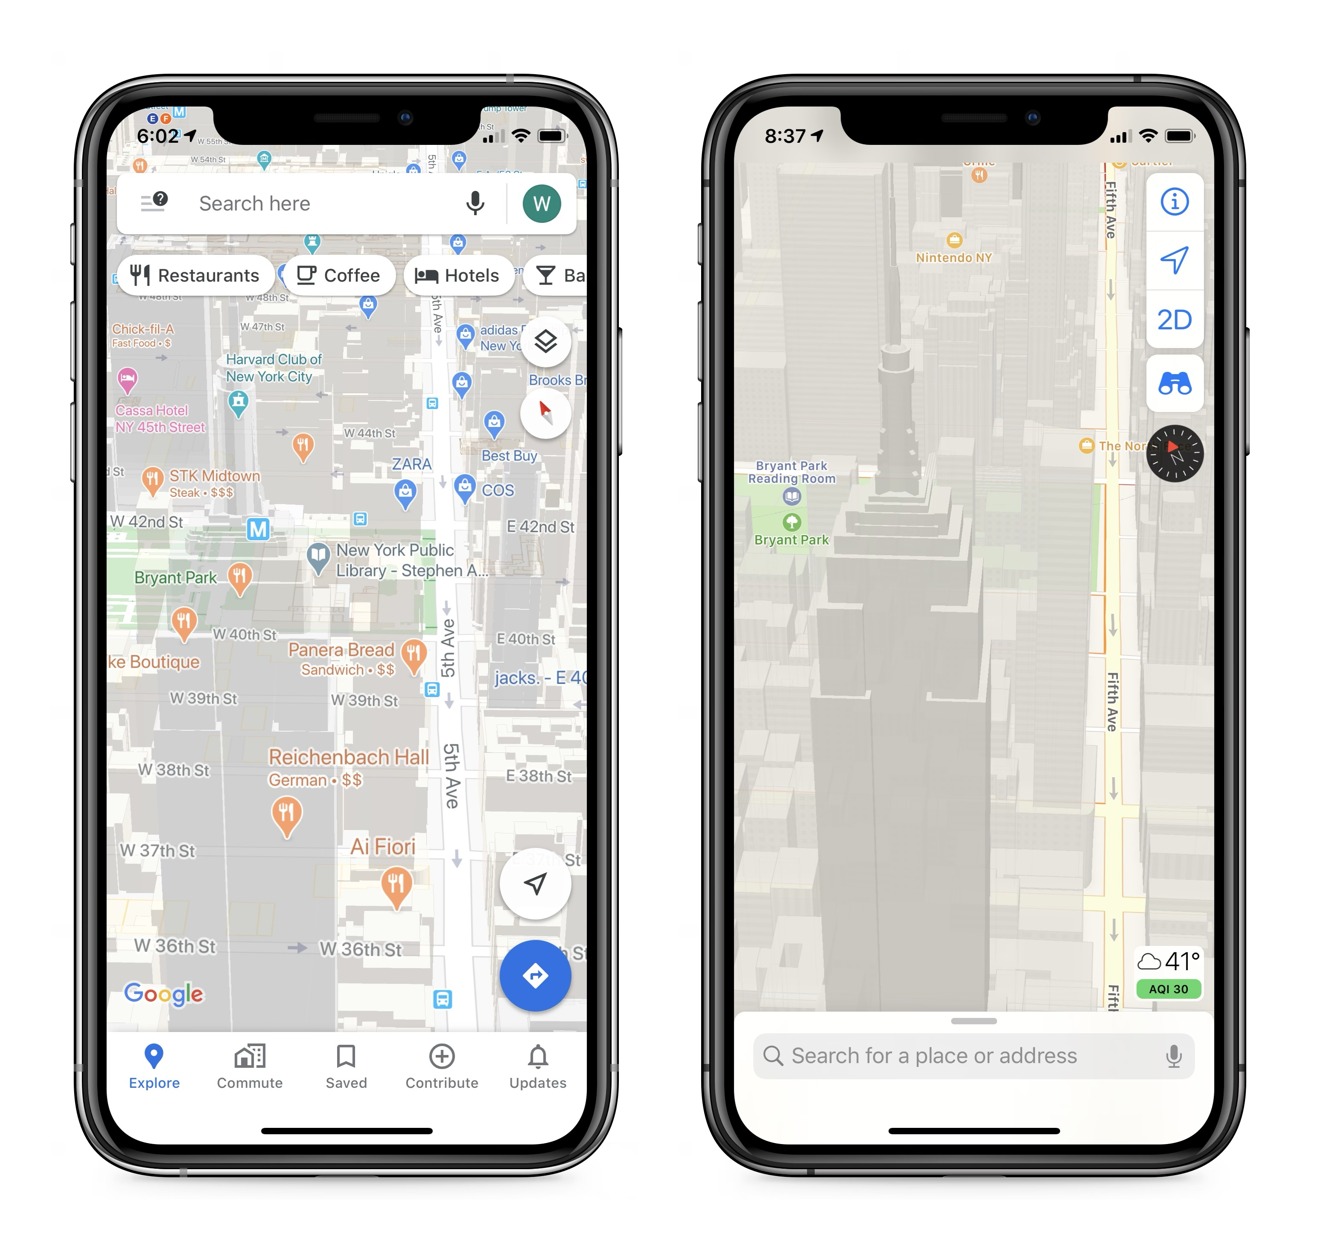 Google Maps shows every bit of data it can squeeze onto the screen, Apple Maps takes a more subtle approach